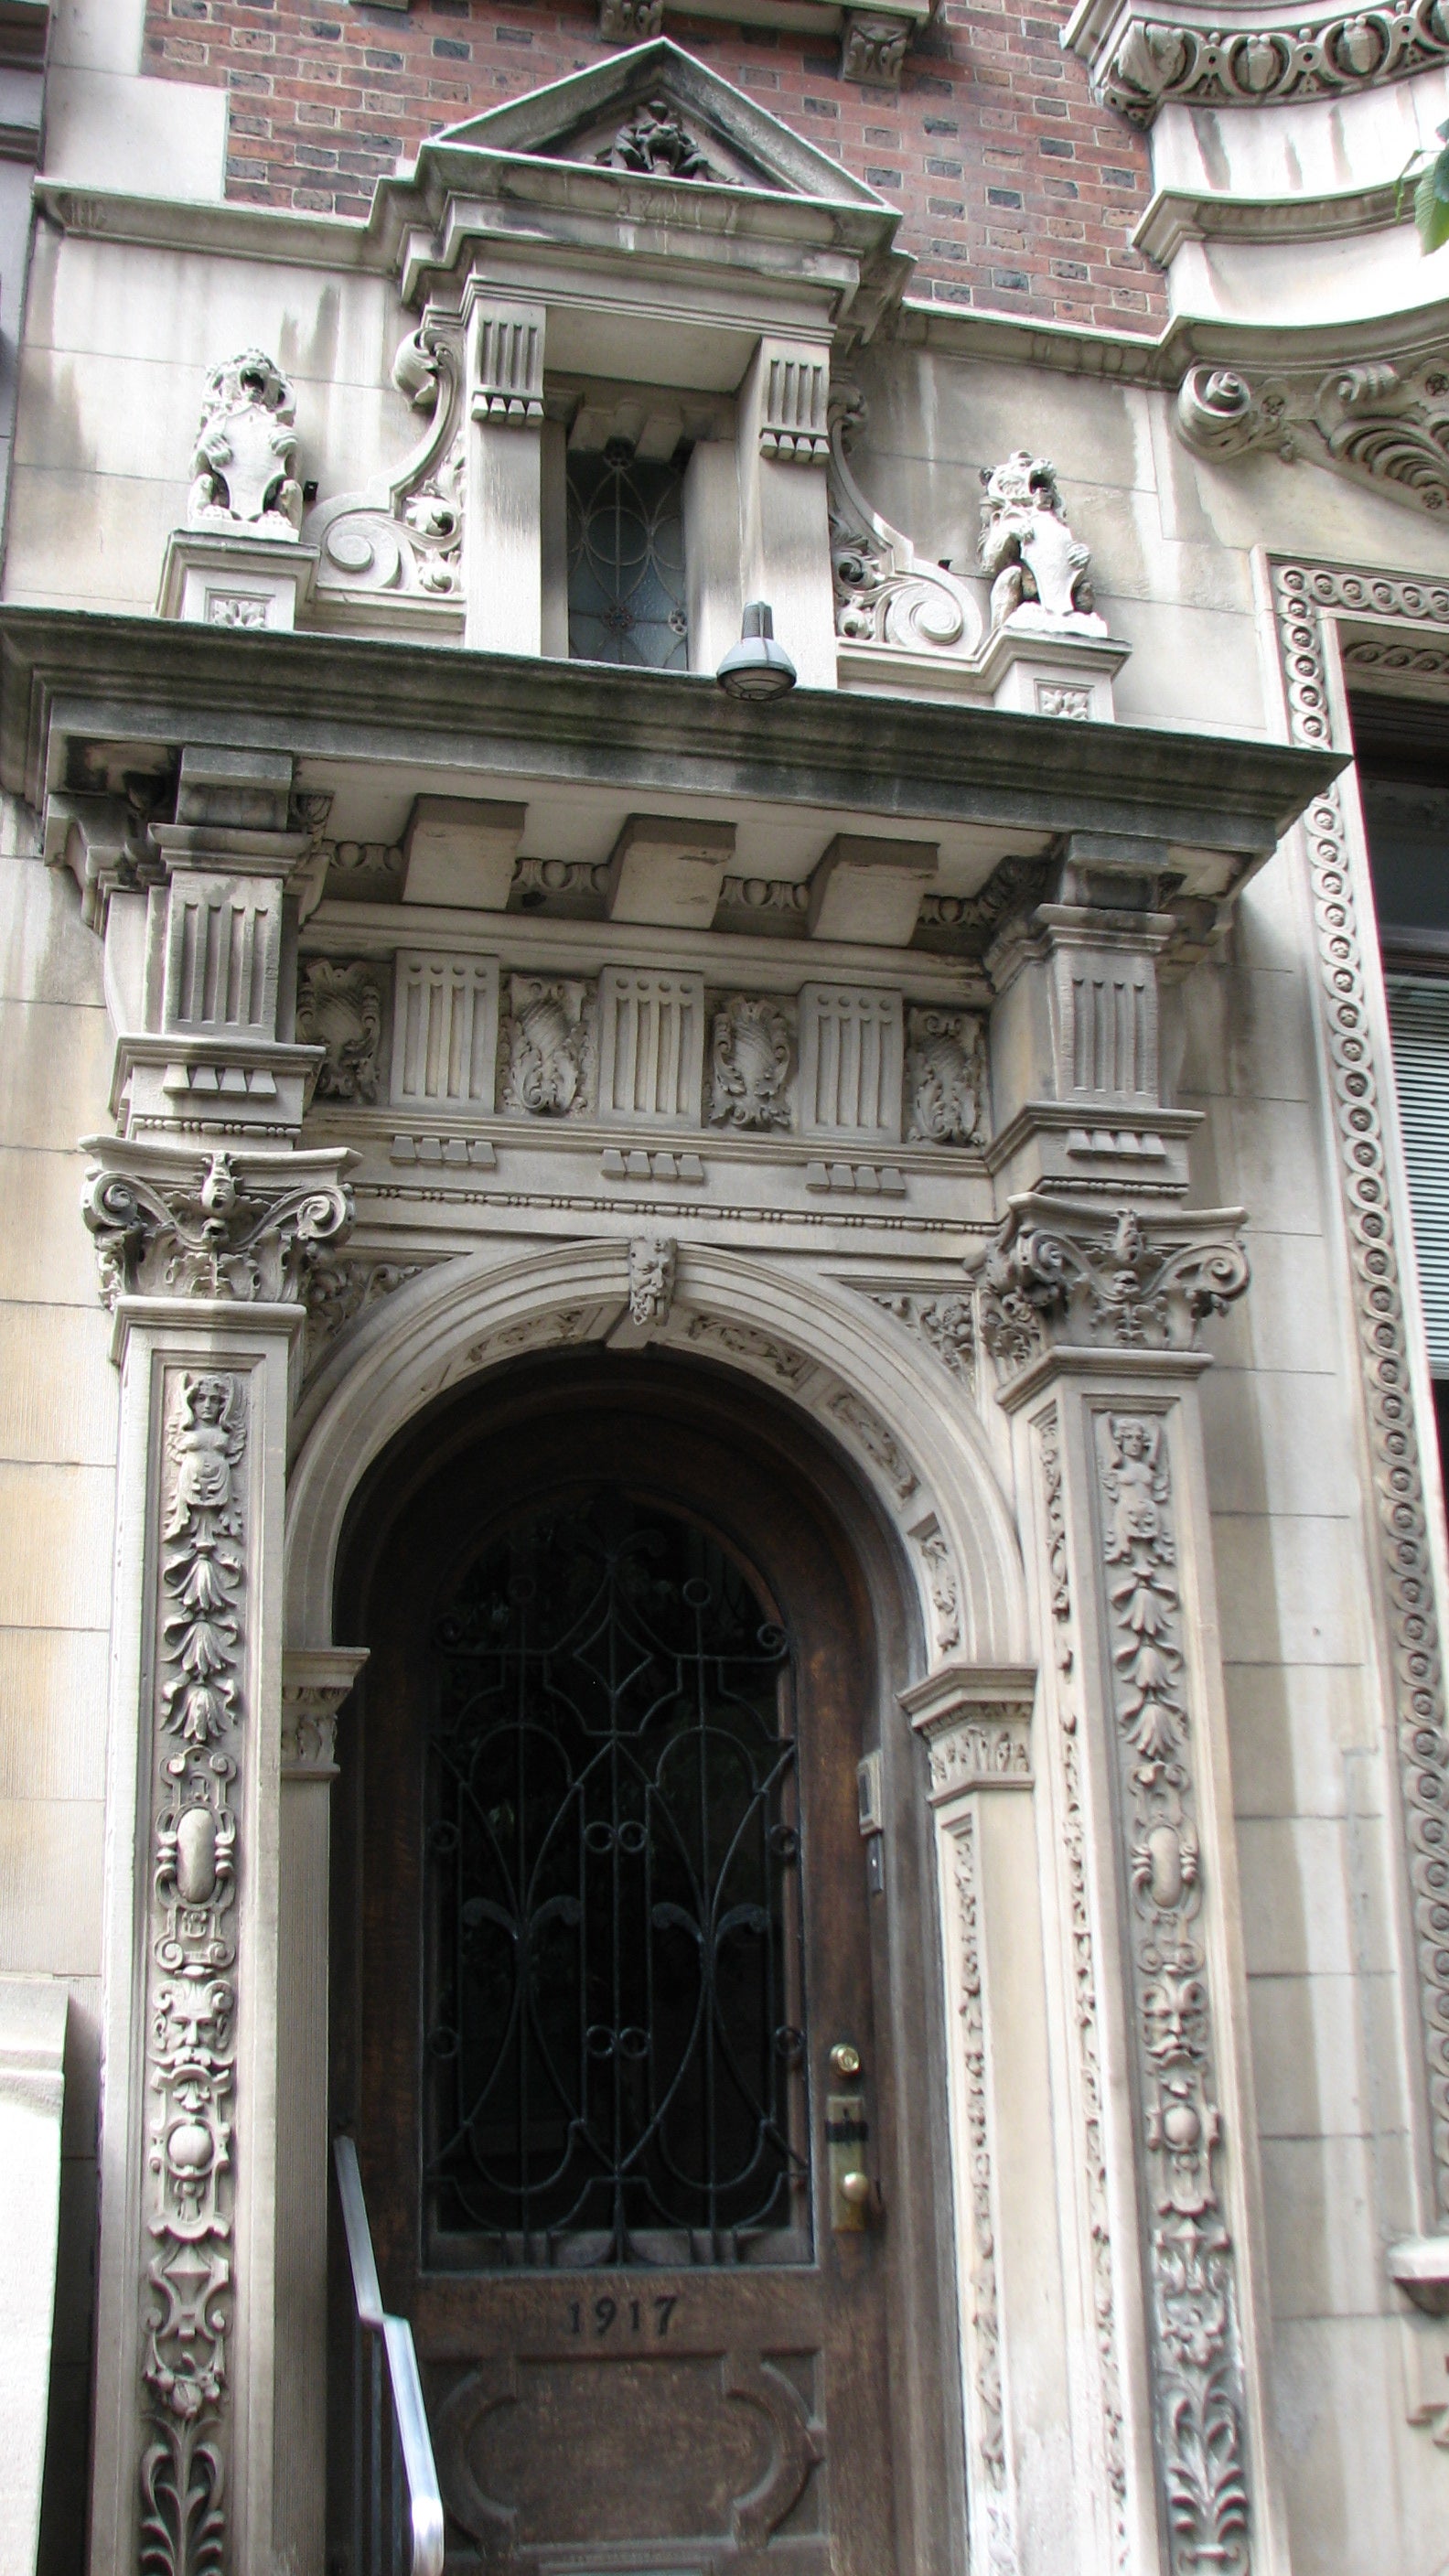 The entrance to 1917 Walnut St.